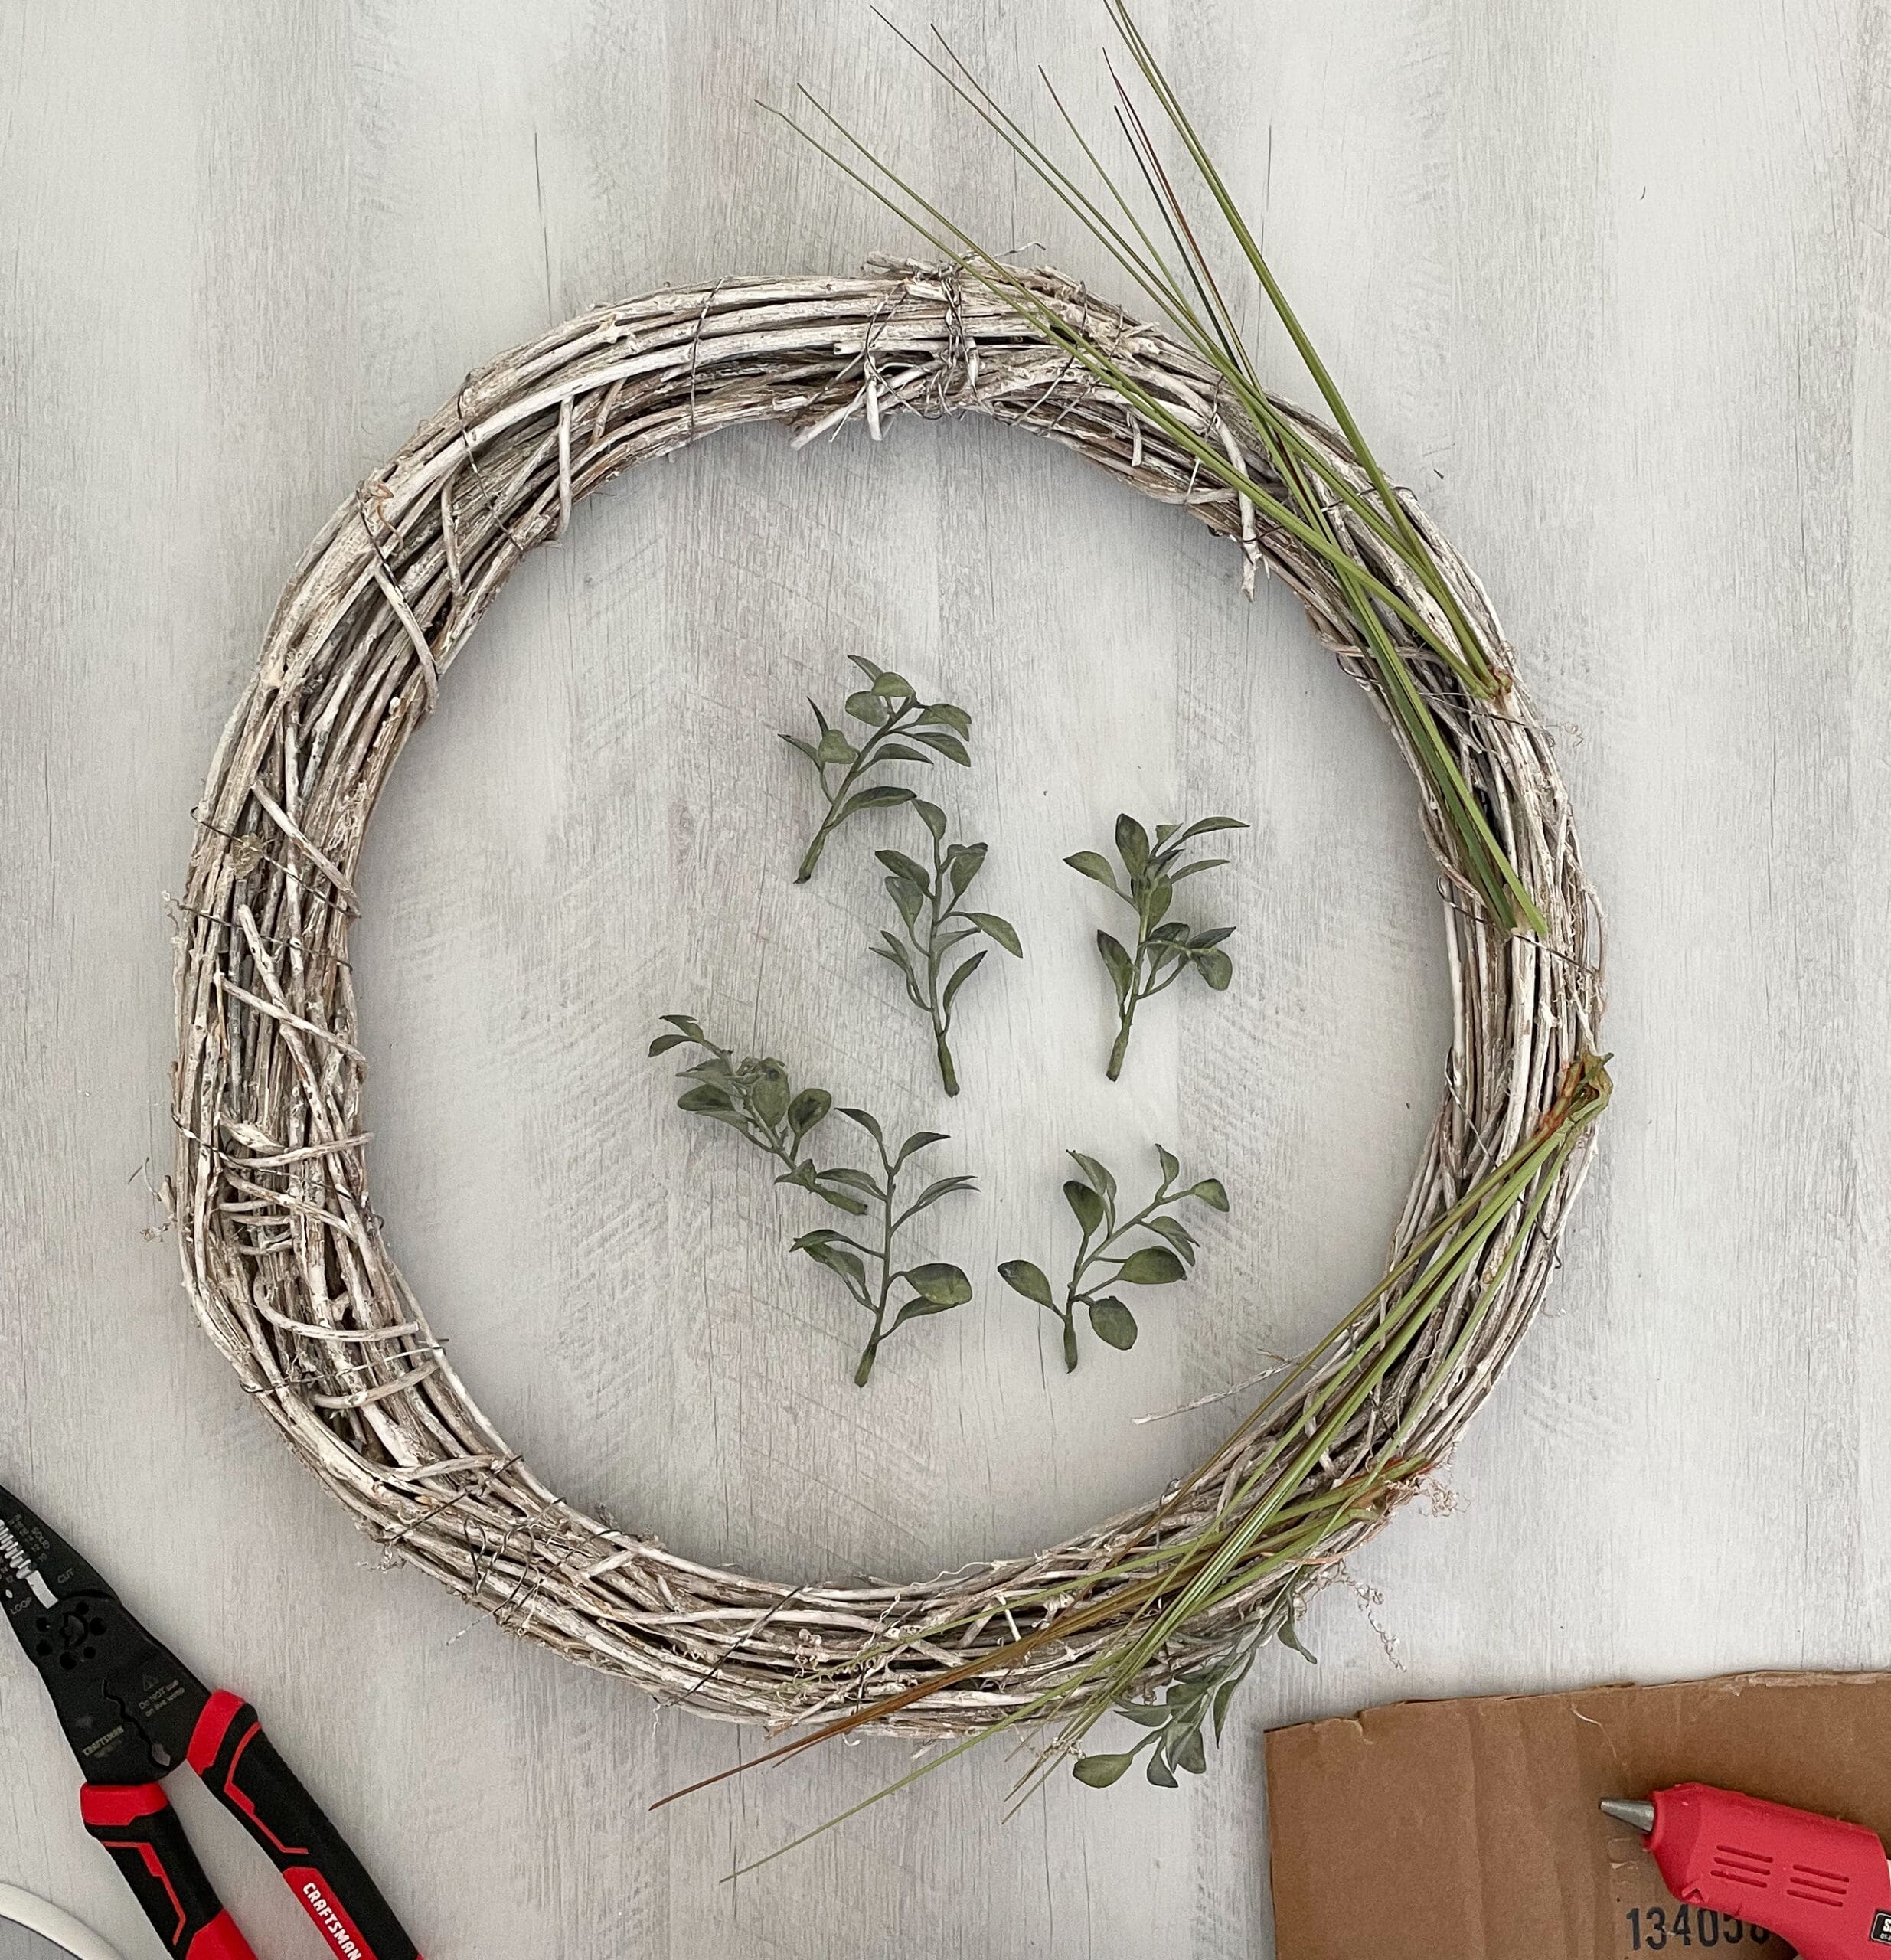 Coastal wreath with greenery ready to be placed